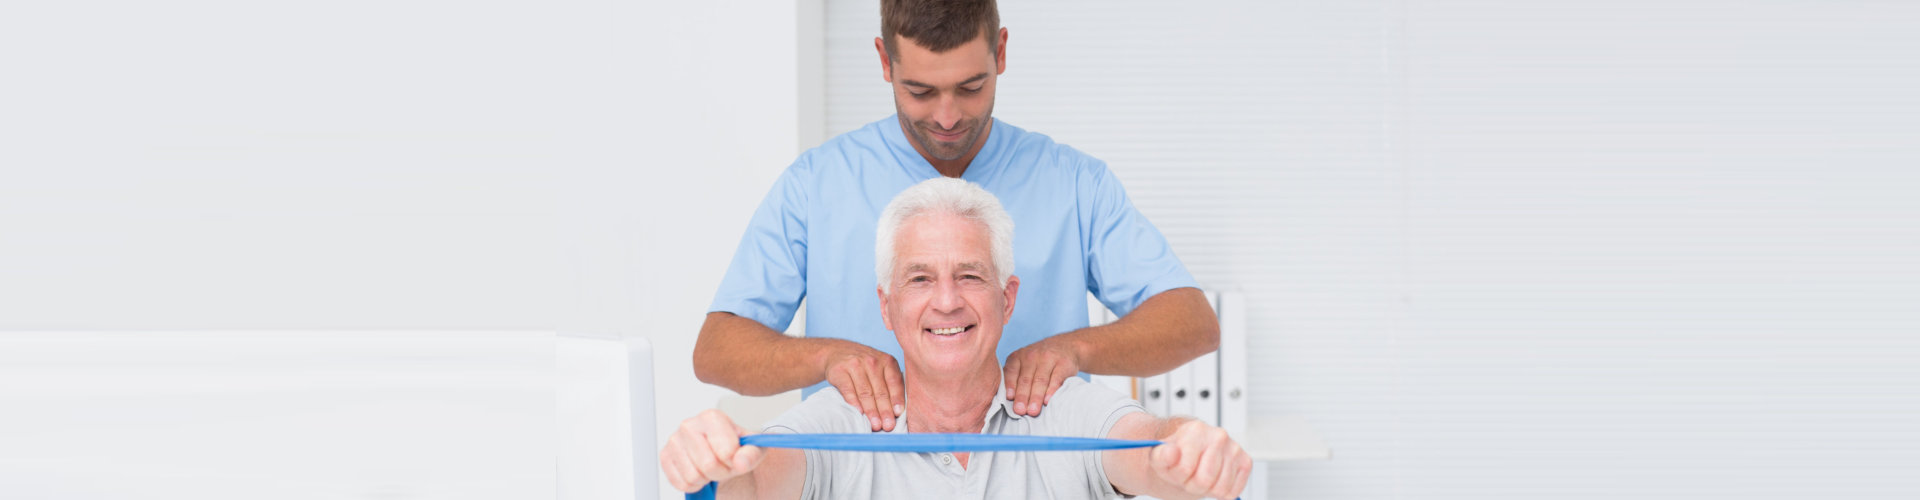 male physical therapist assisting senior man in exercising with resistance band